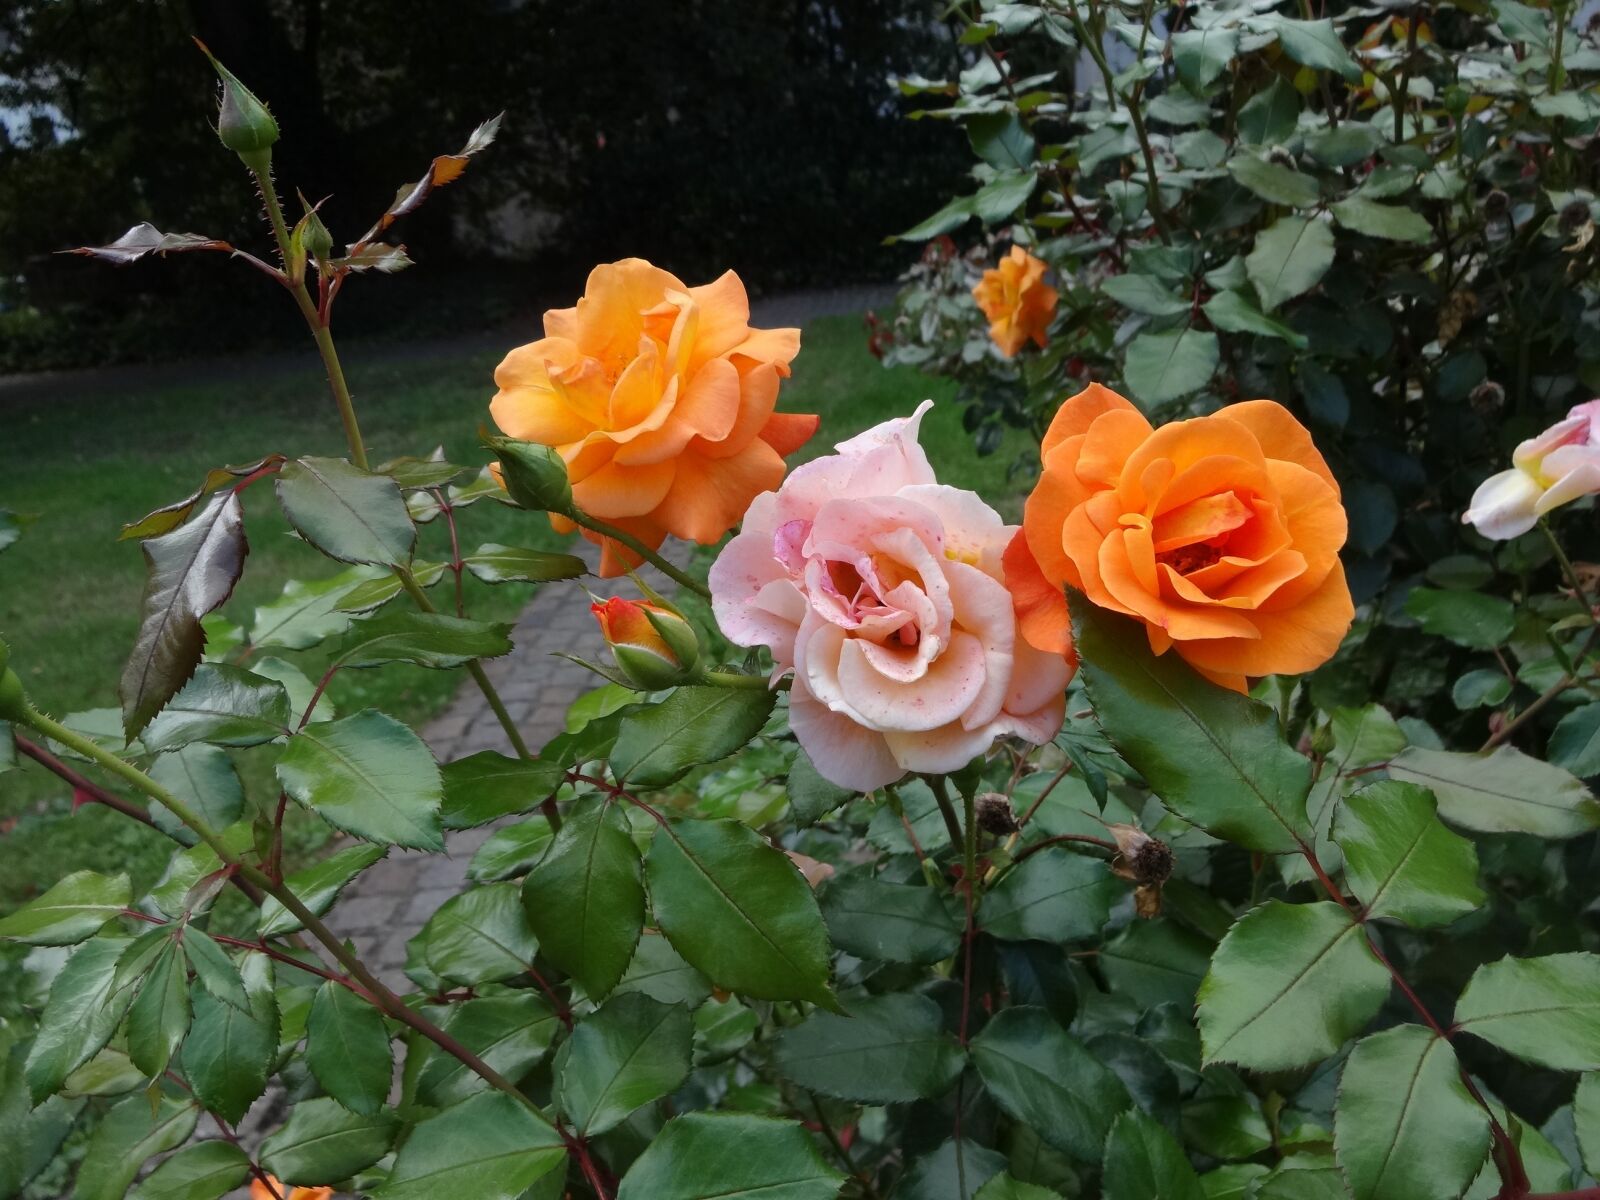 Sony DSC-WX100 sample photo. Rose, orange, later becoming photography